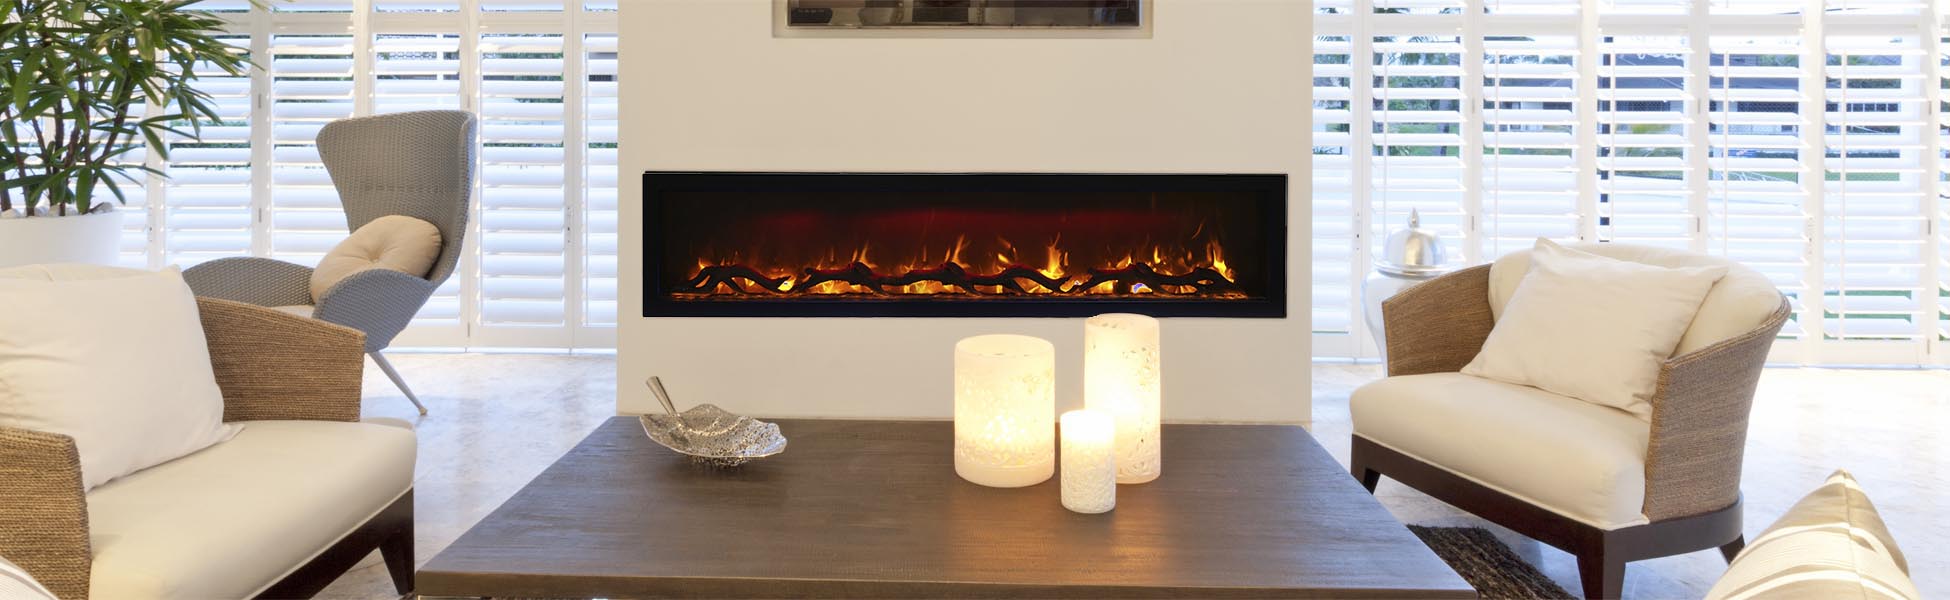 SYM-74 electric fireplaces